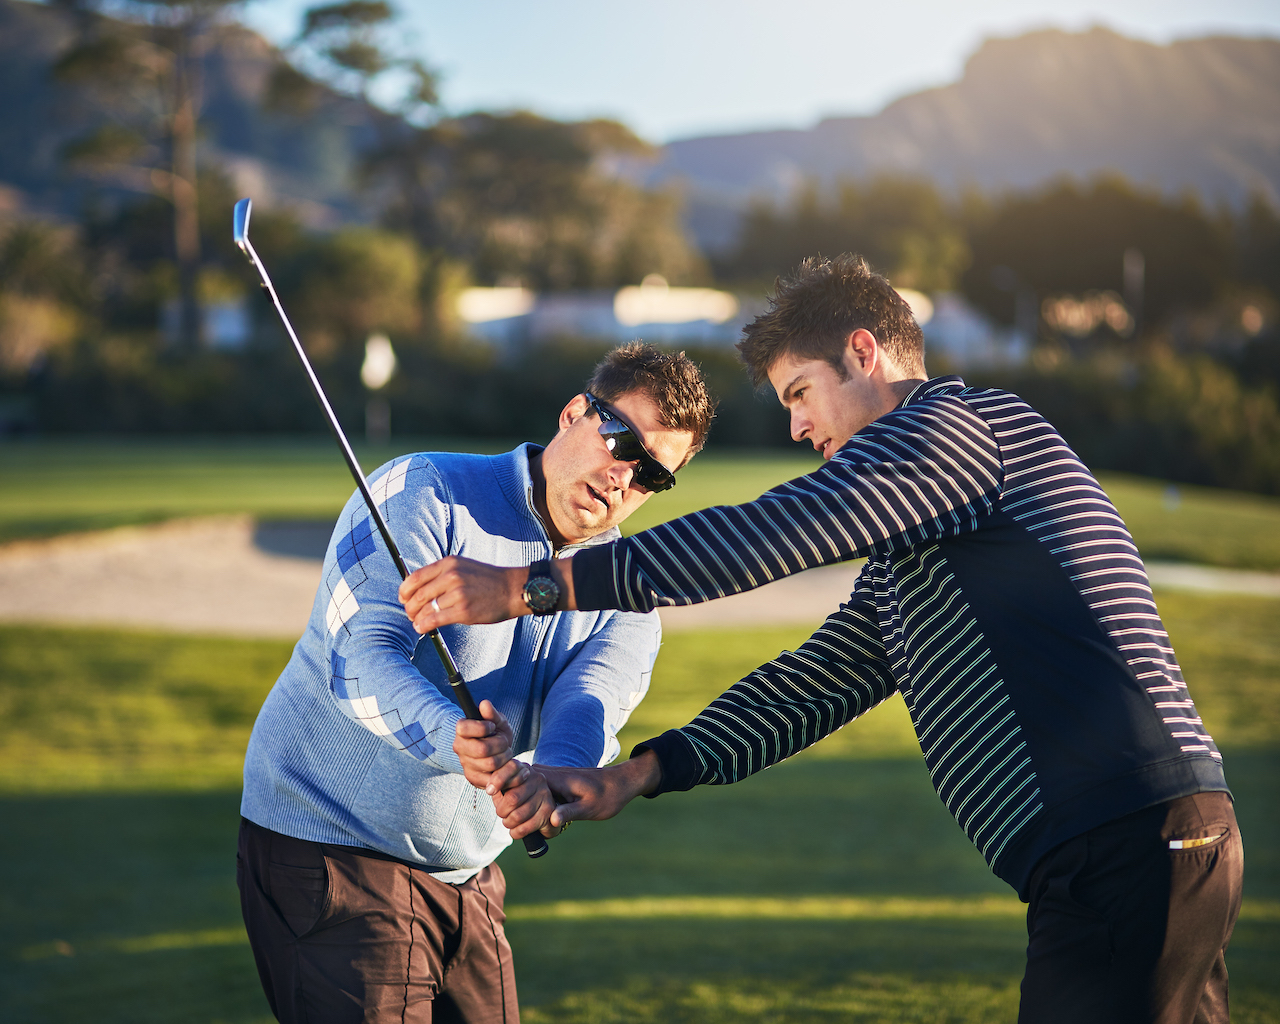 Instructor giving golfer lessons